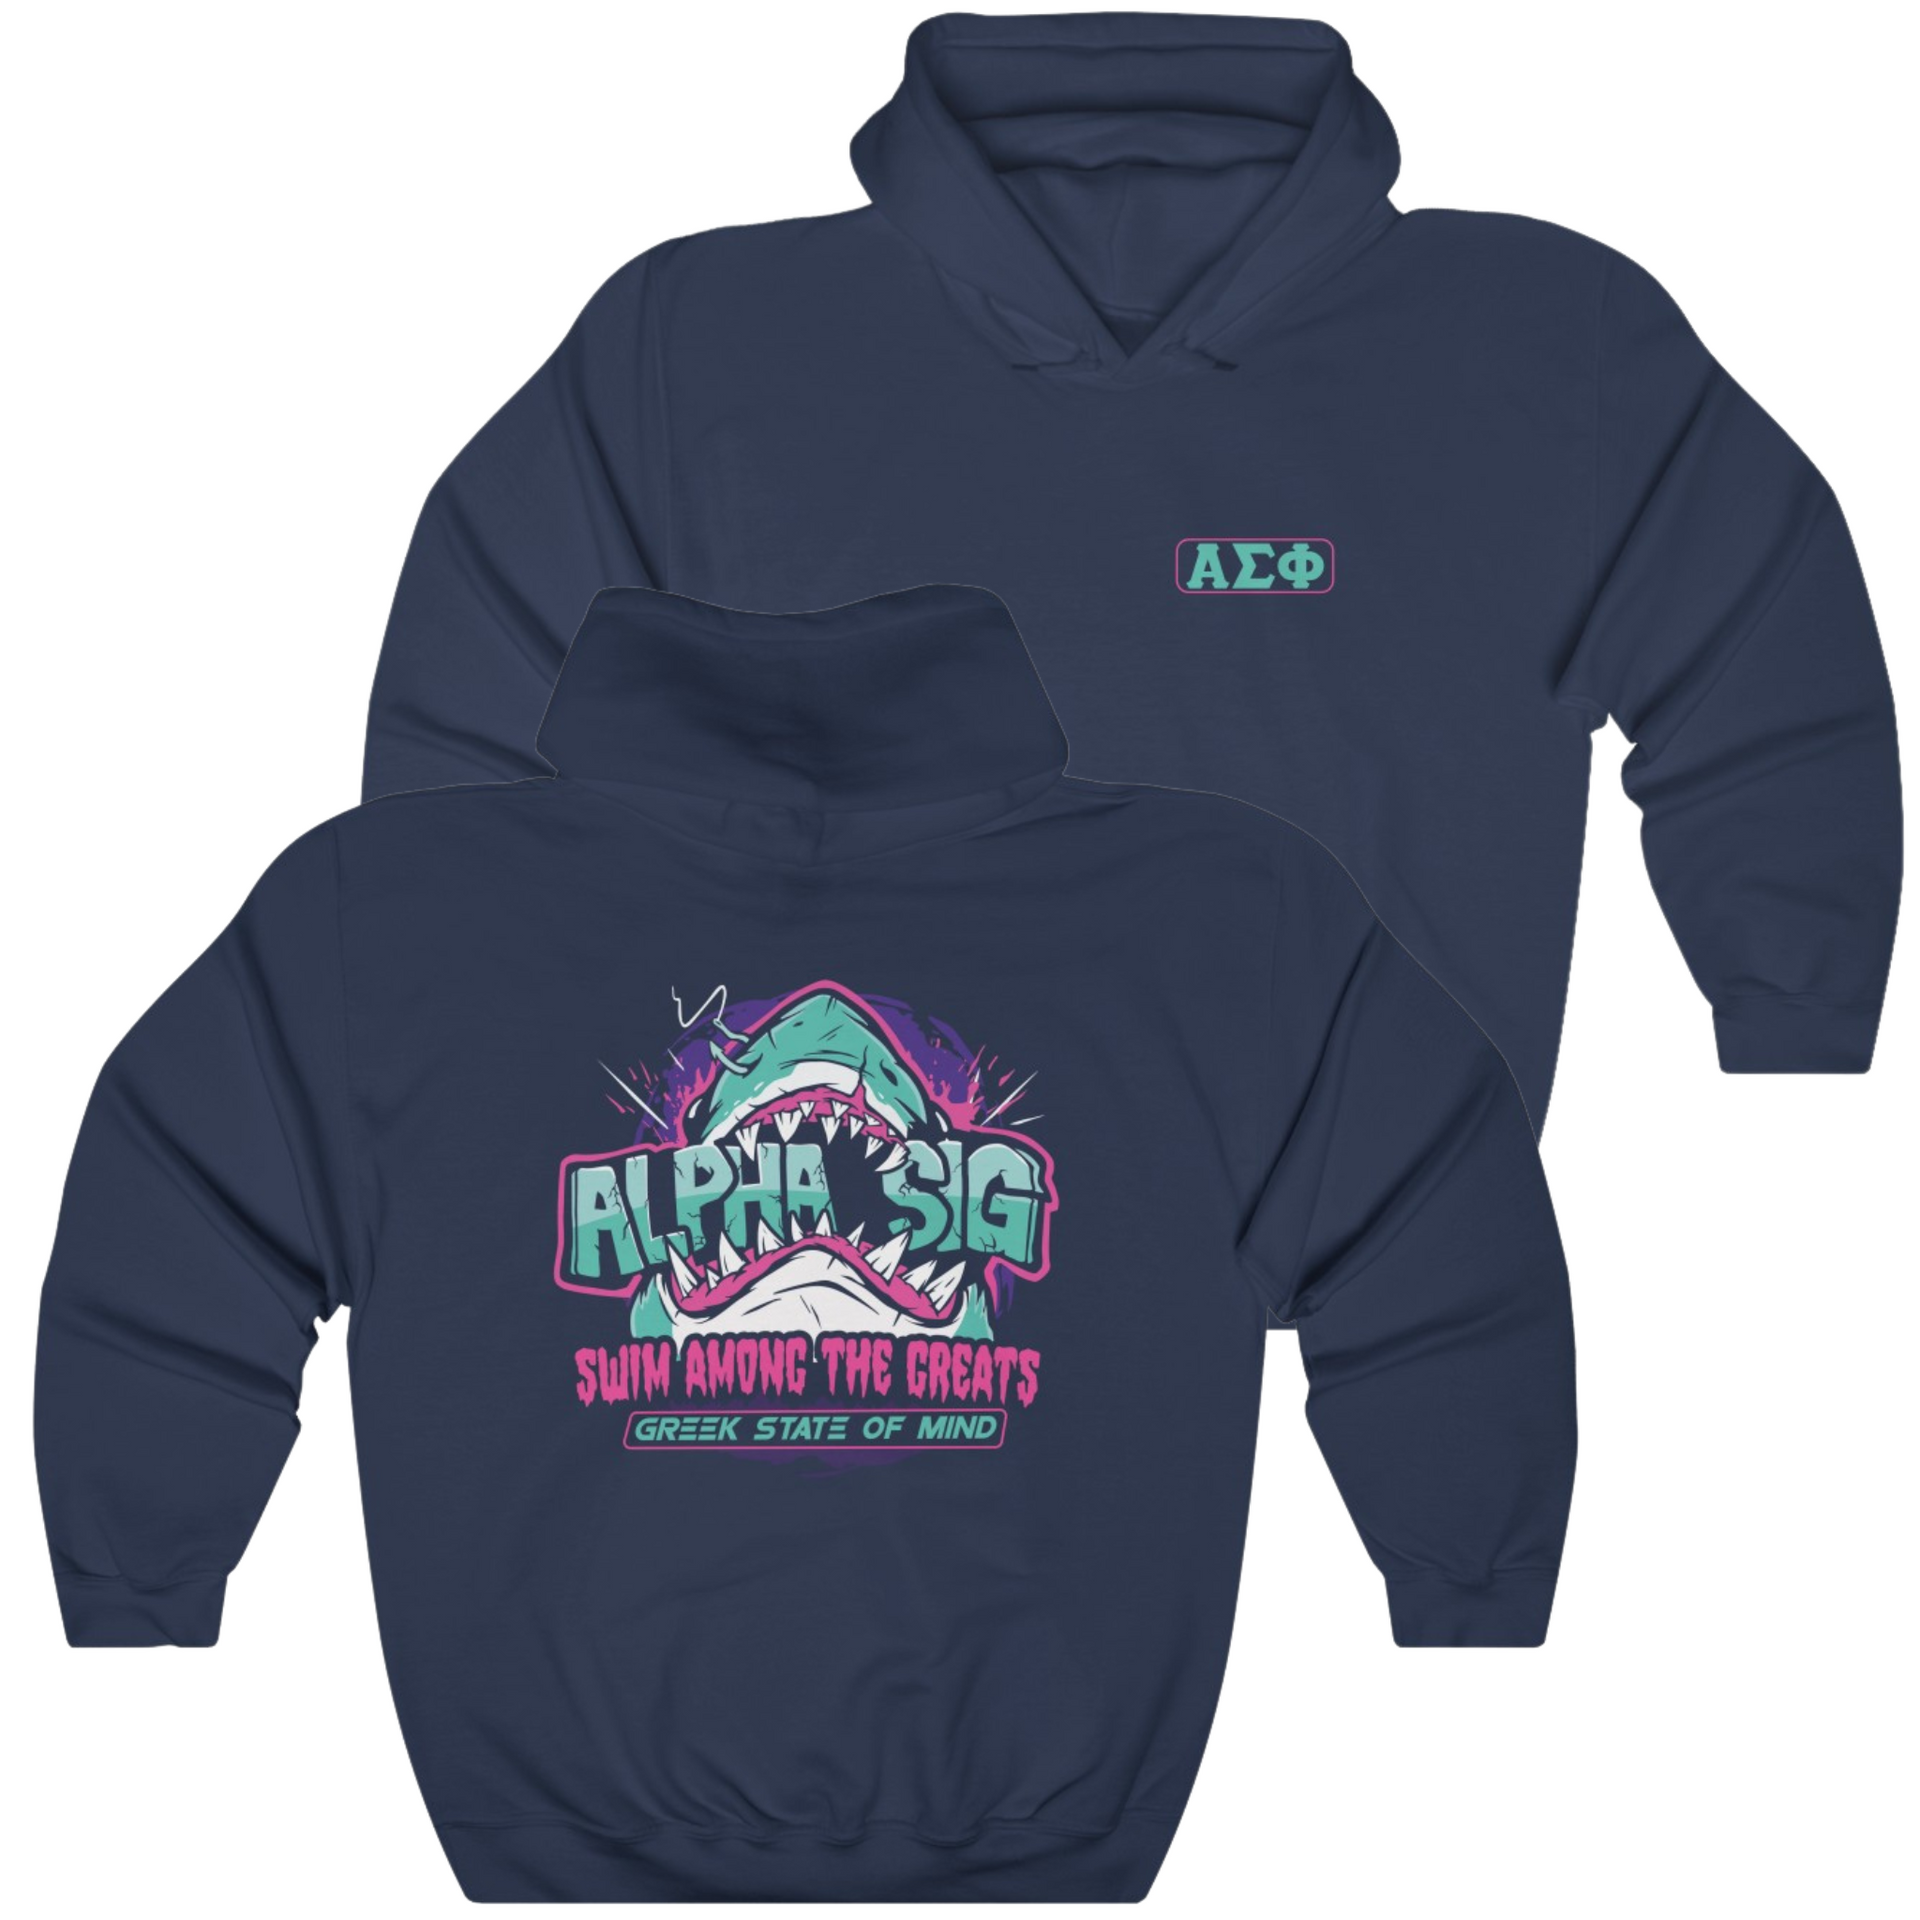 Navy Alpha Sigma Phi Graphic Hoodie | The Deep End | Alpha Sigma Phi Fraternity Hoodie 